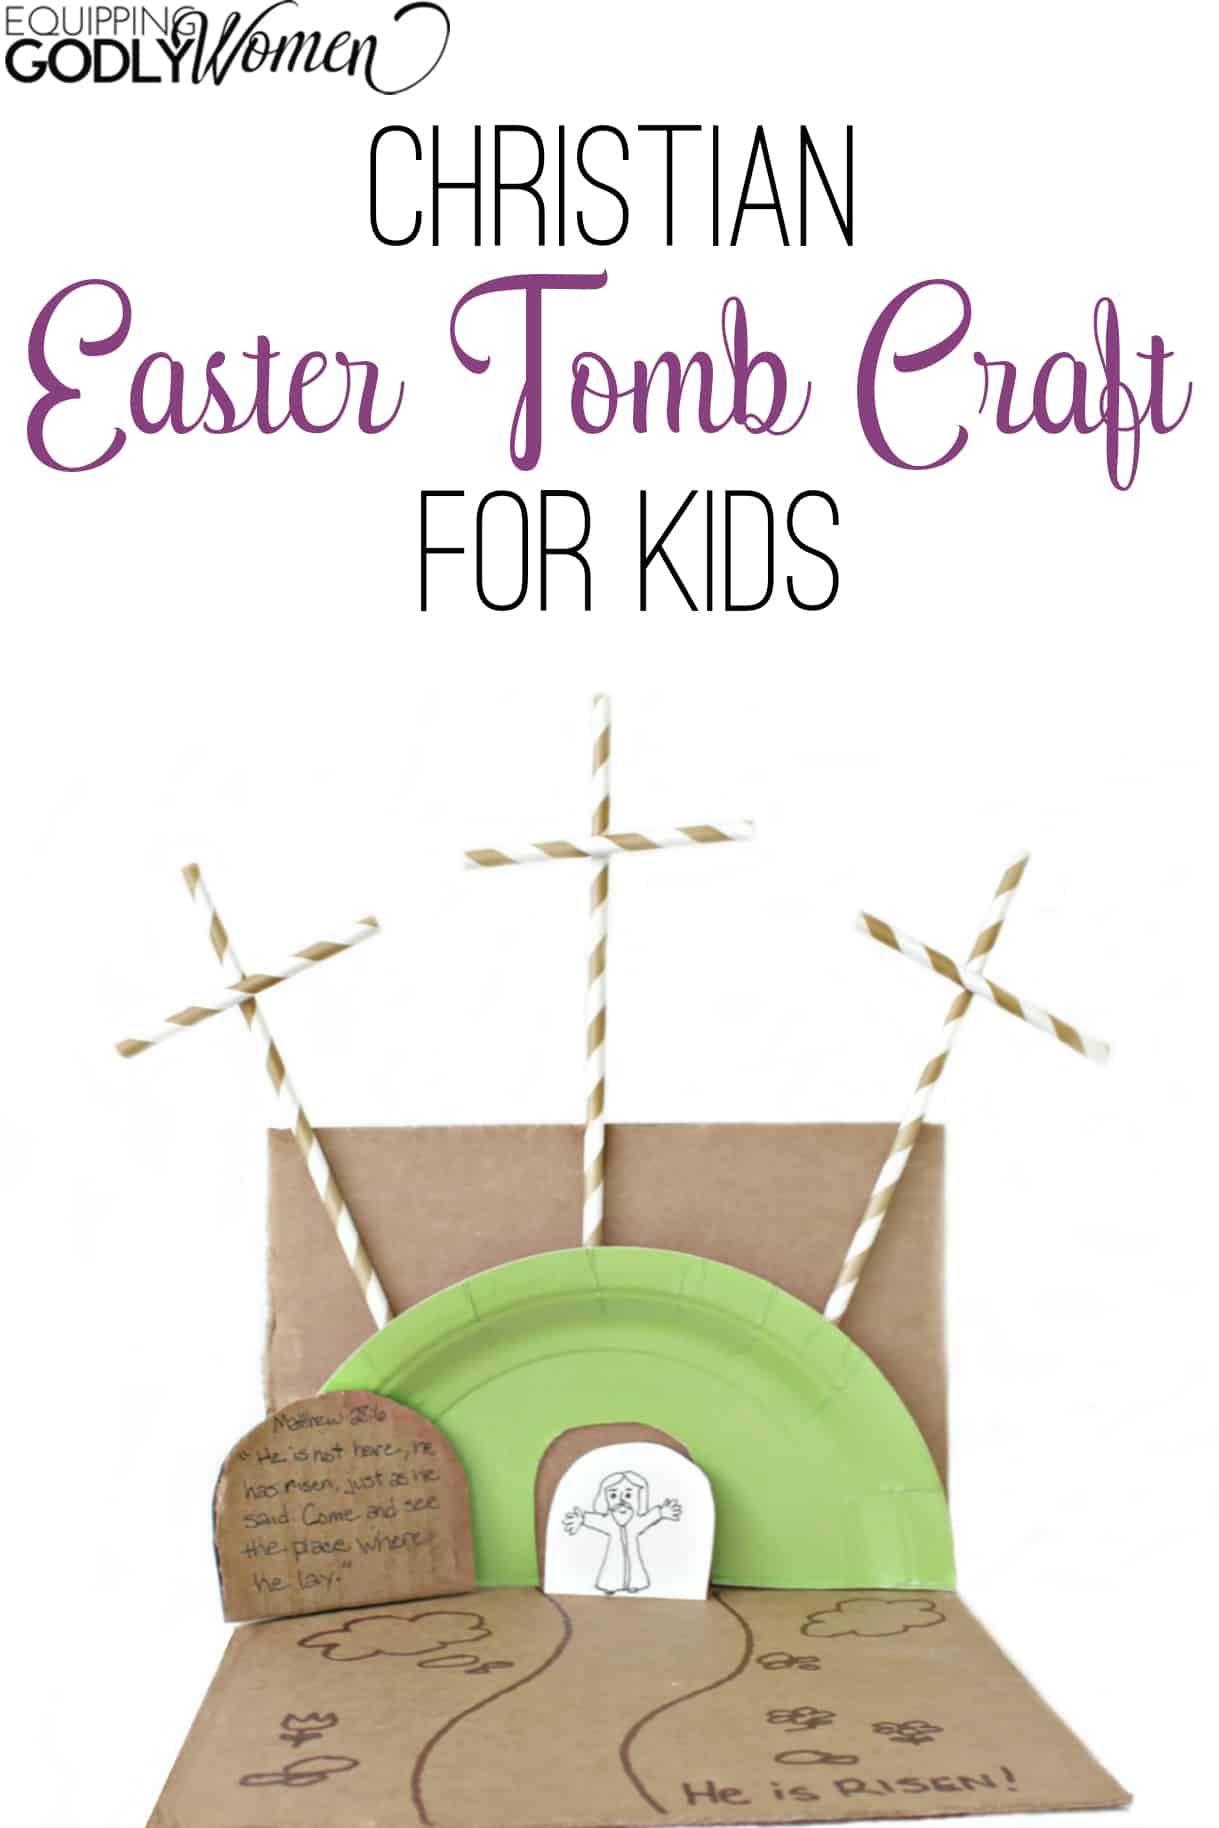 he-is-risen-empty-tomb-craft-for-kids